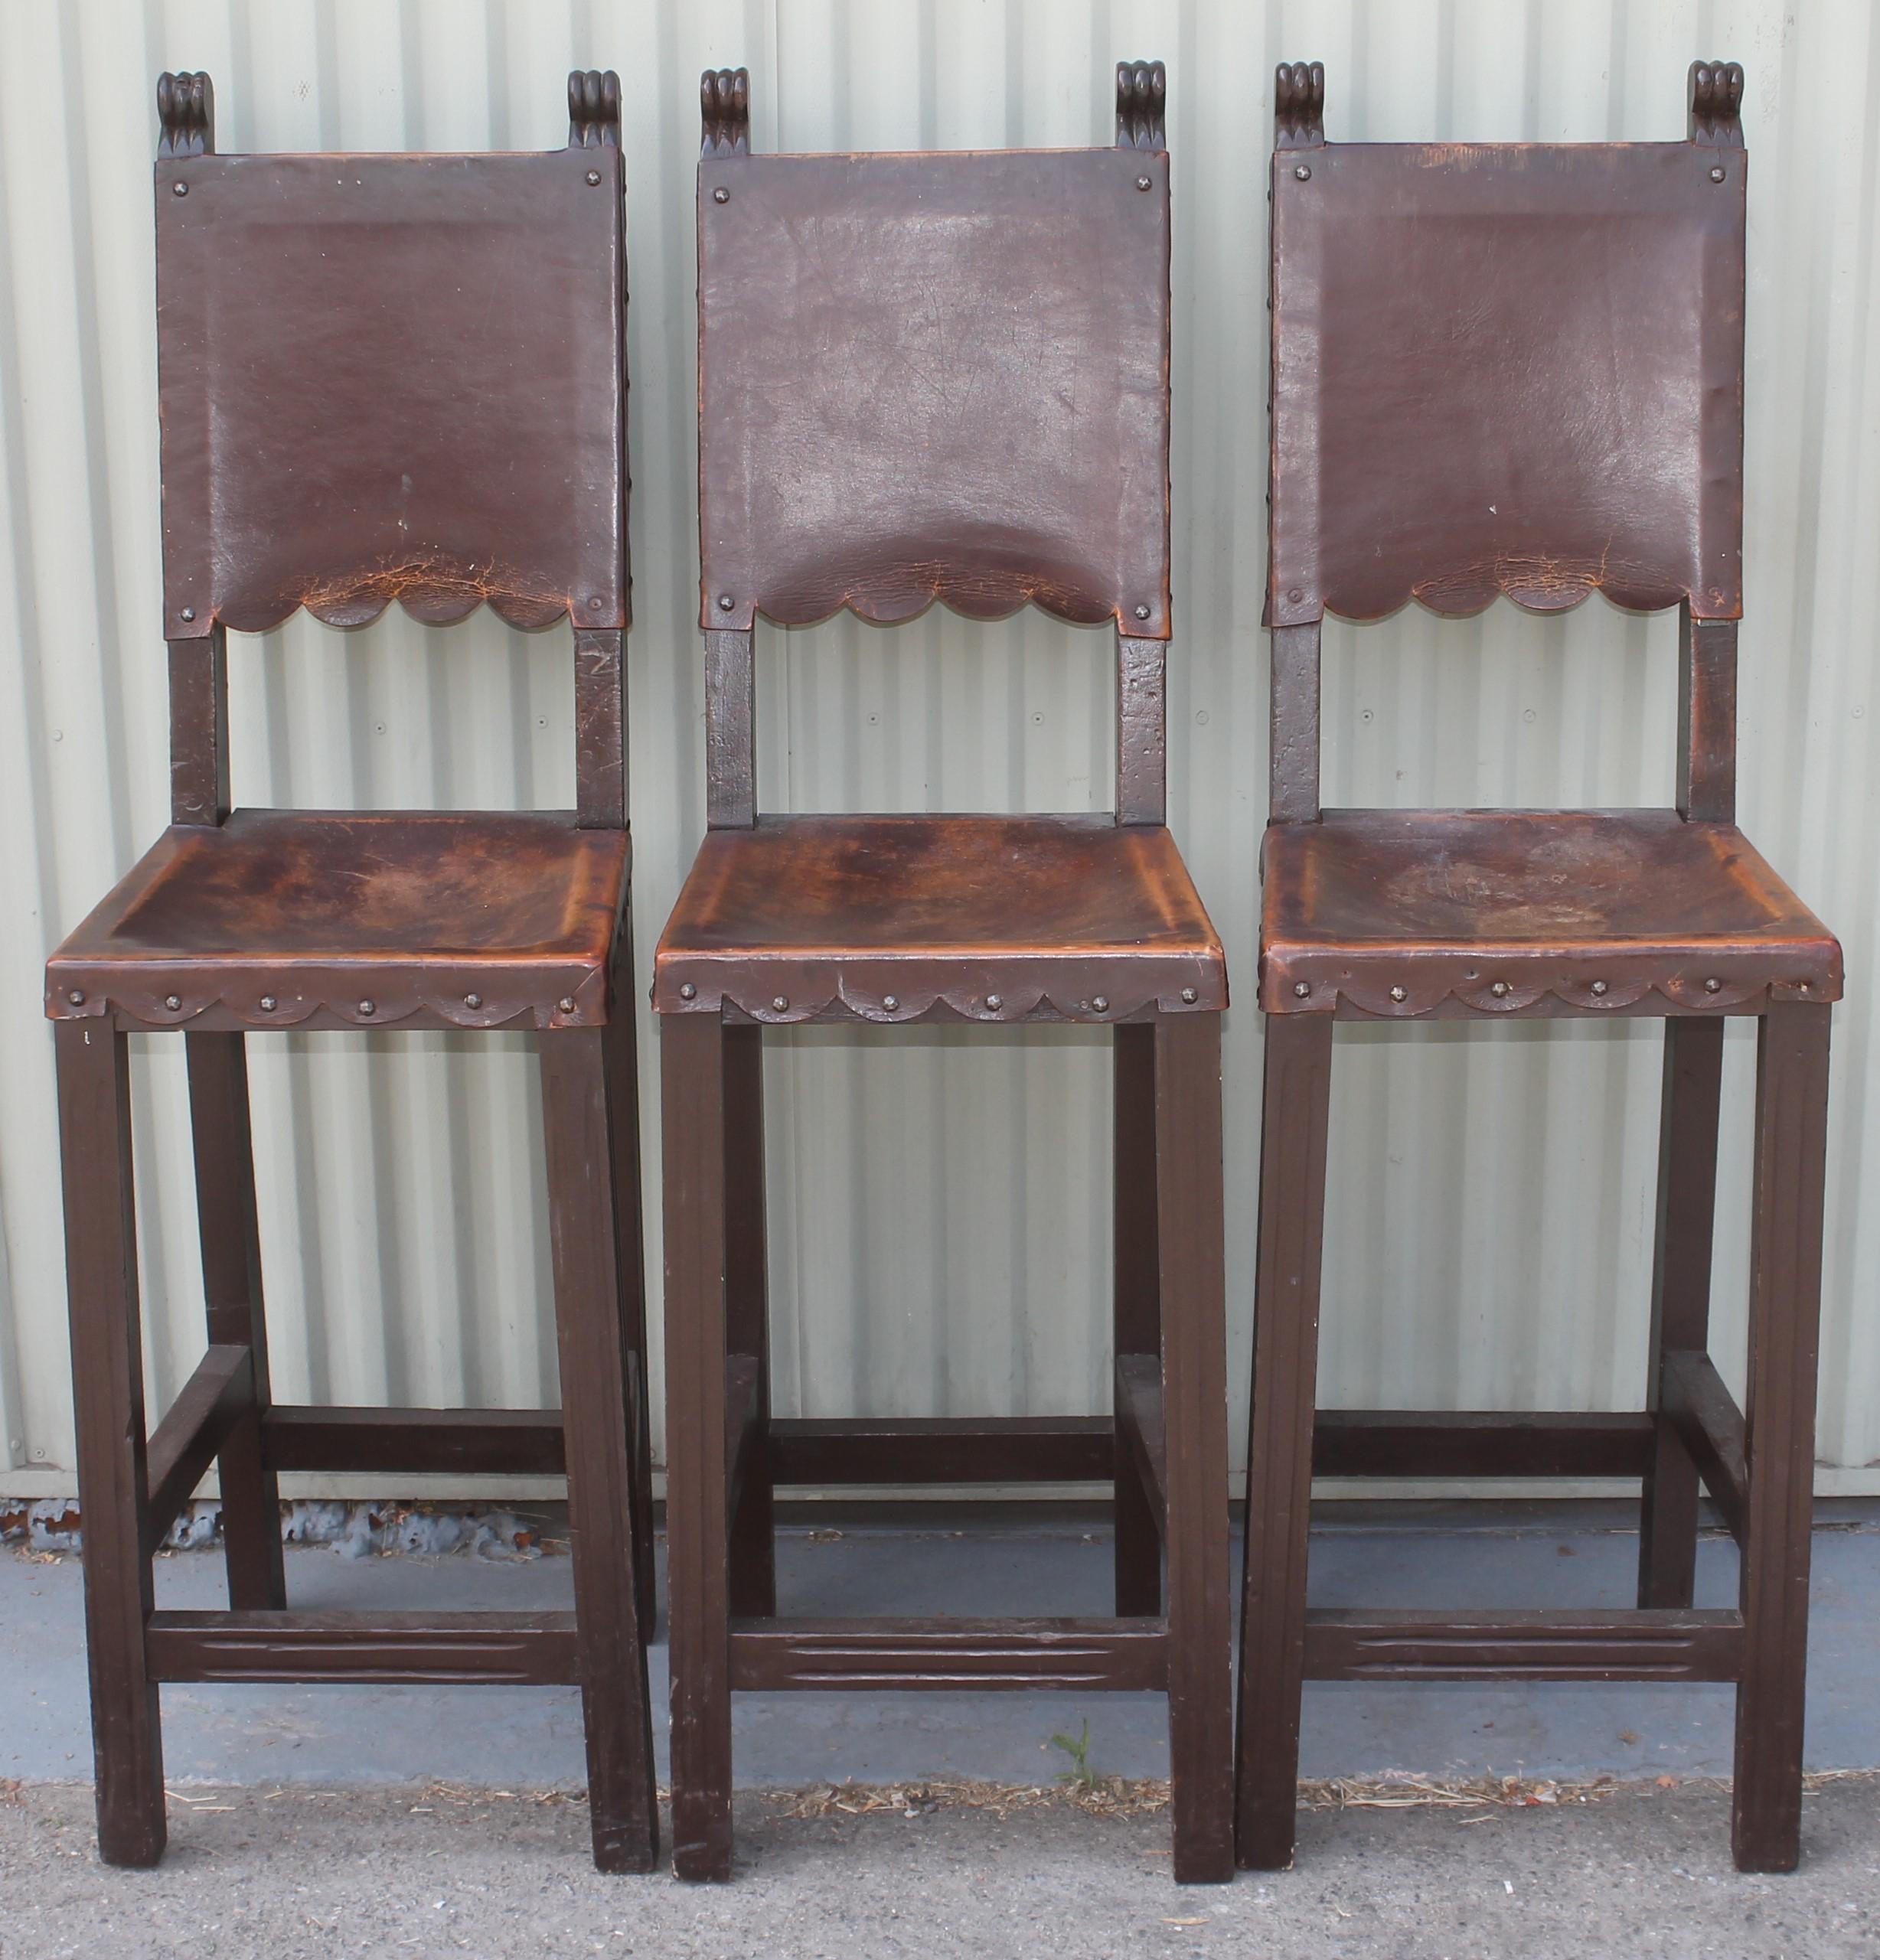 Set of three Spanish style bar stools in very good condition with original leather seats. The patina on the original seats and backs are amazing. Its very rare to find the original leather in such great condition.
(Seat height measures 28 inches).